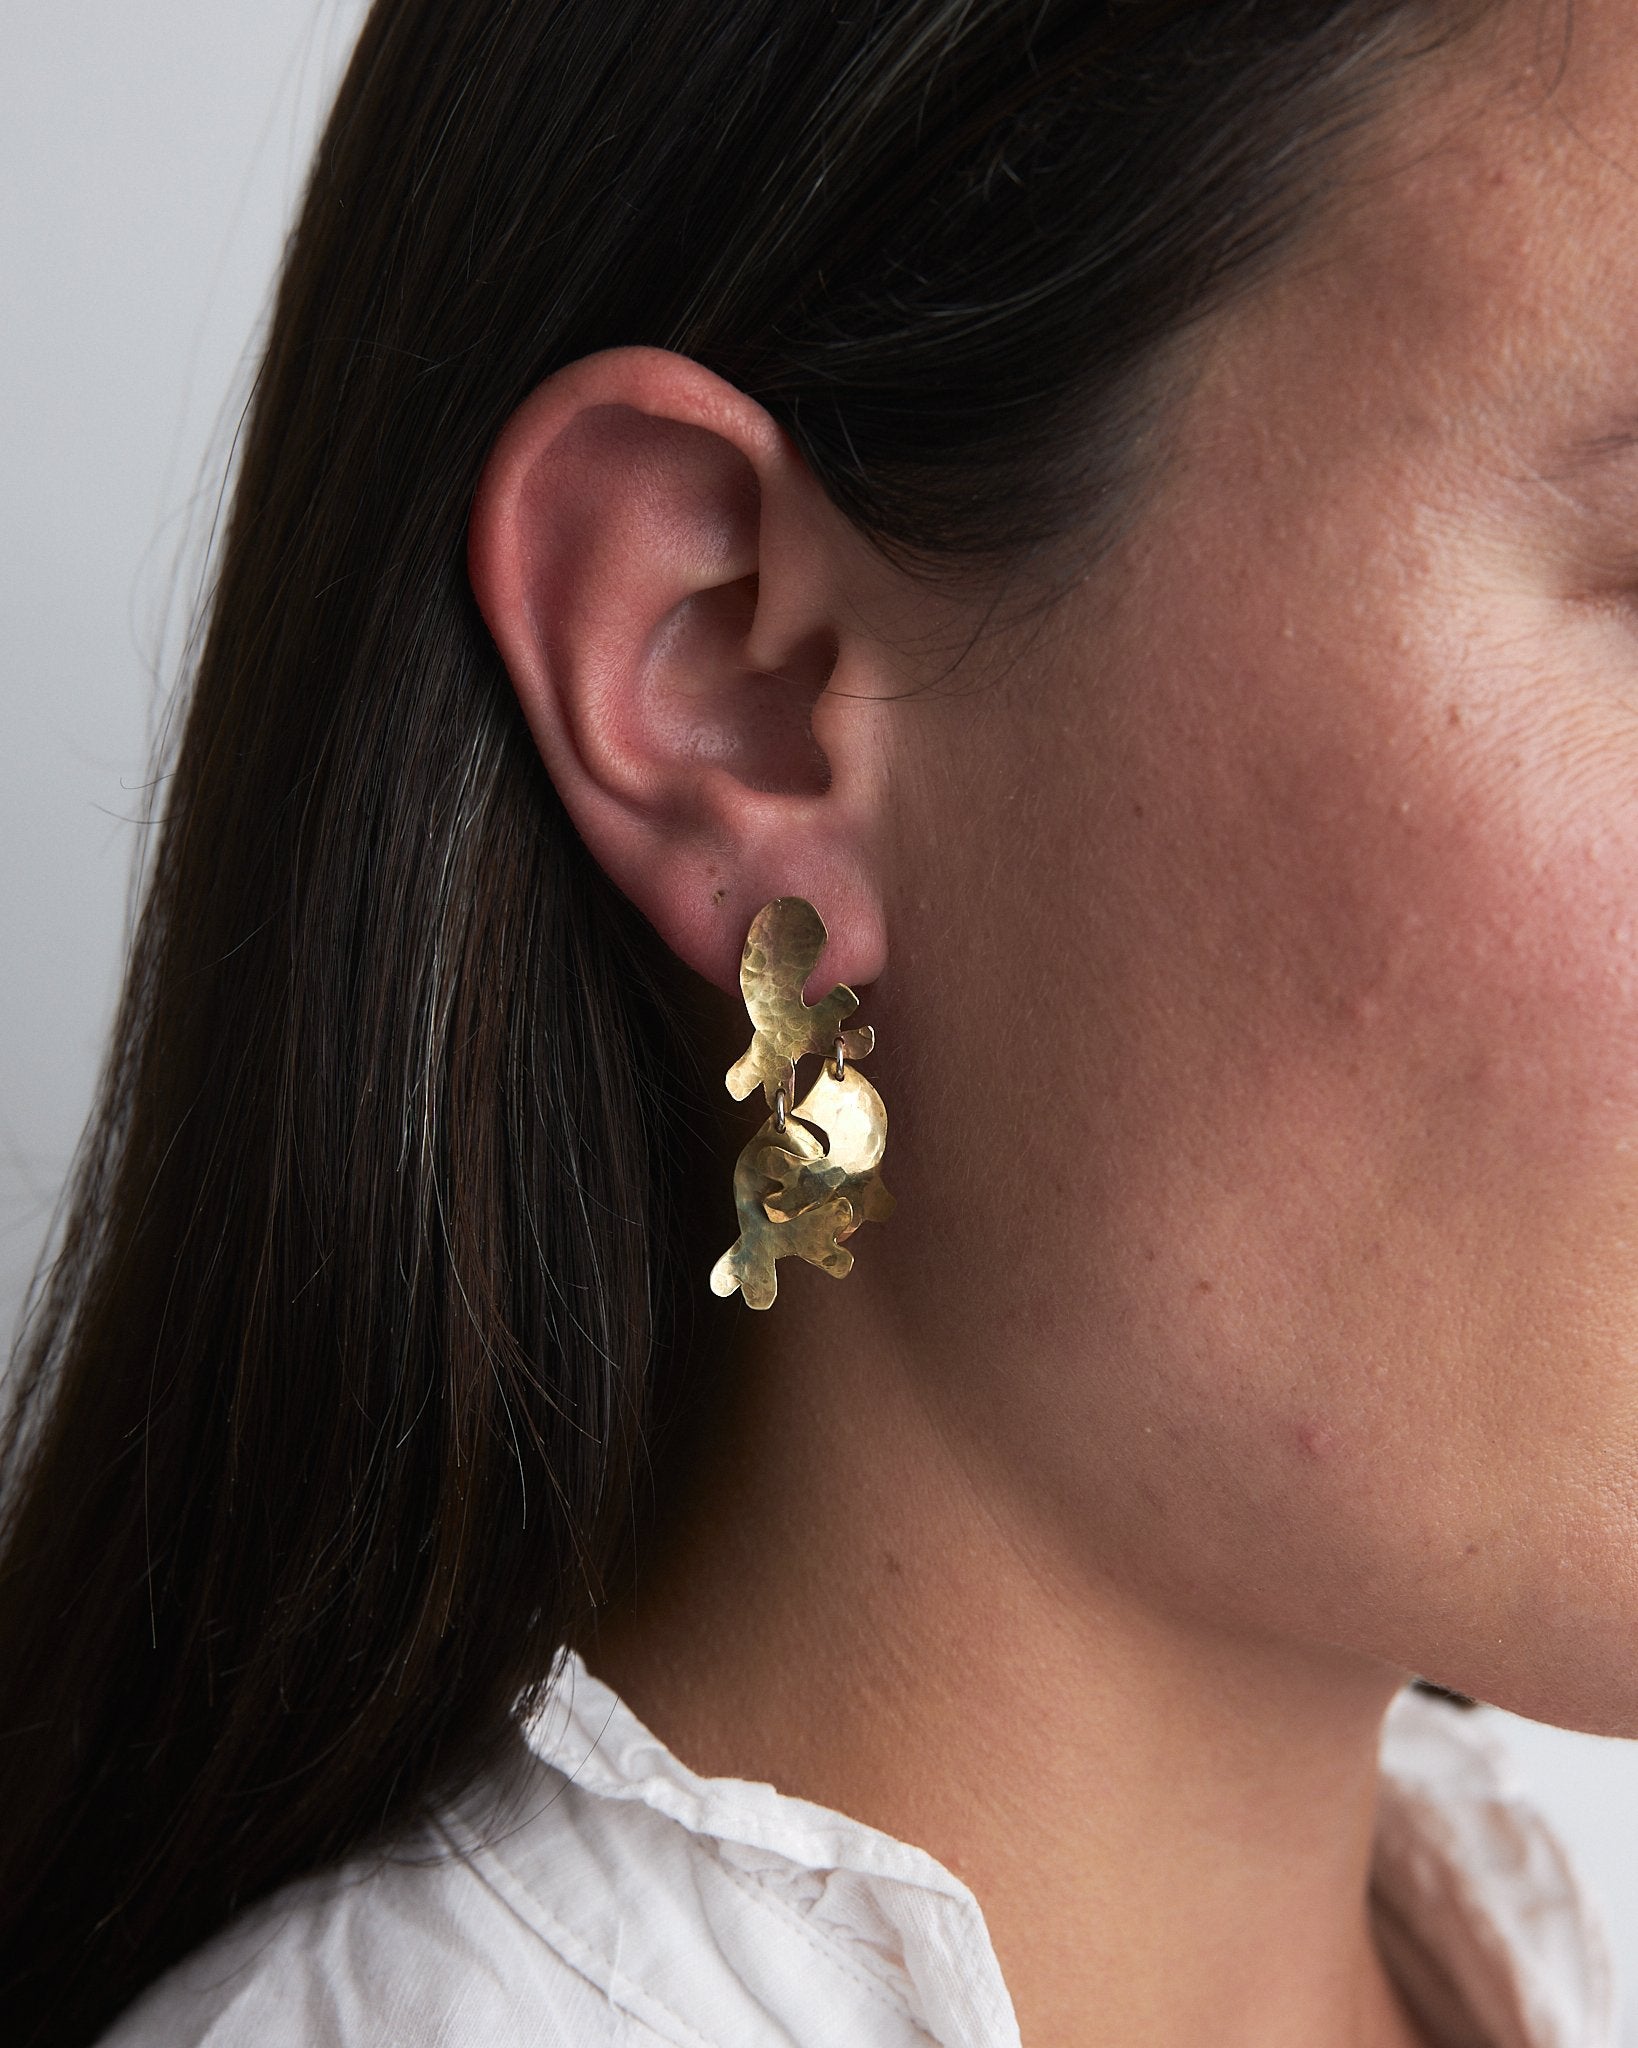 Sea Moss Earrings: handmade recycled brass earrings inspired by the beautiful shapes of sea moss. Worn by a model.